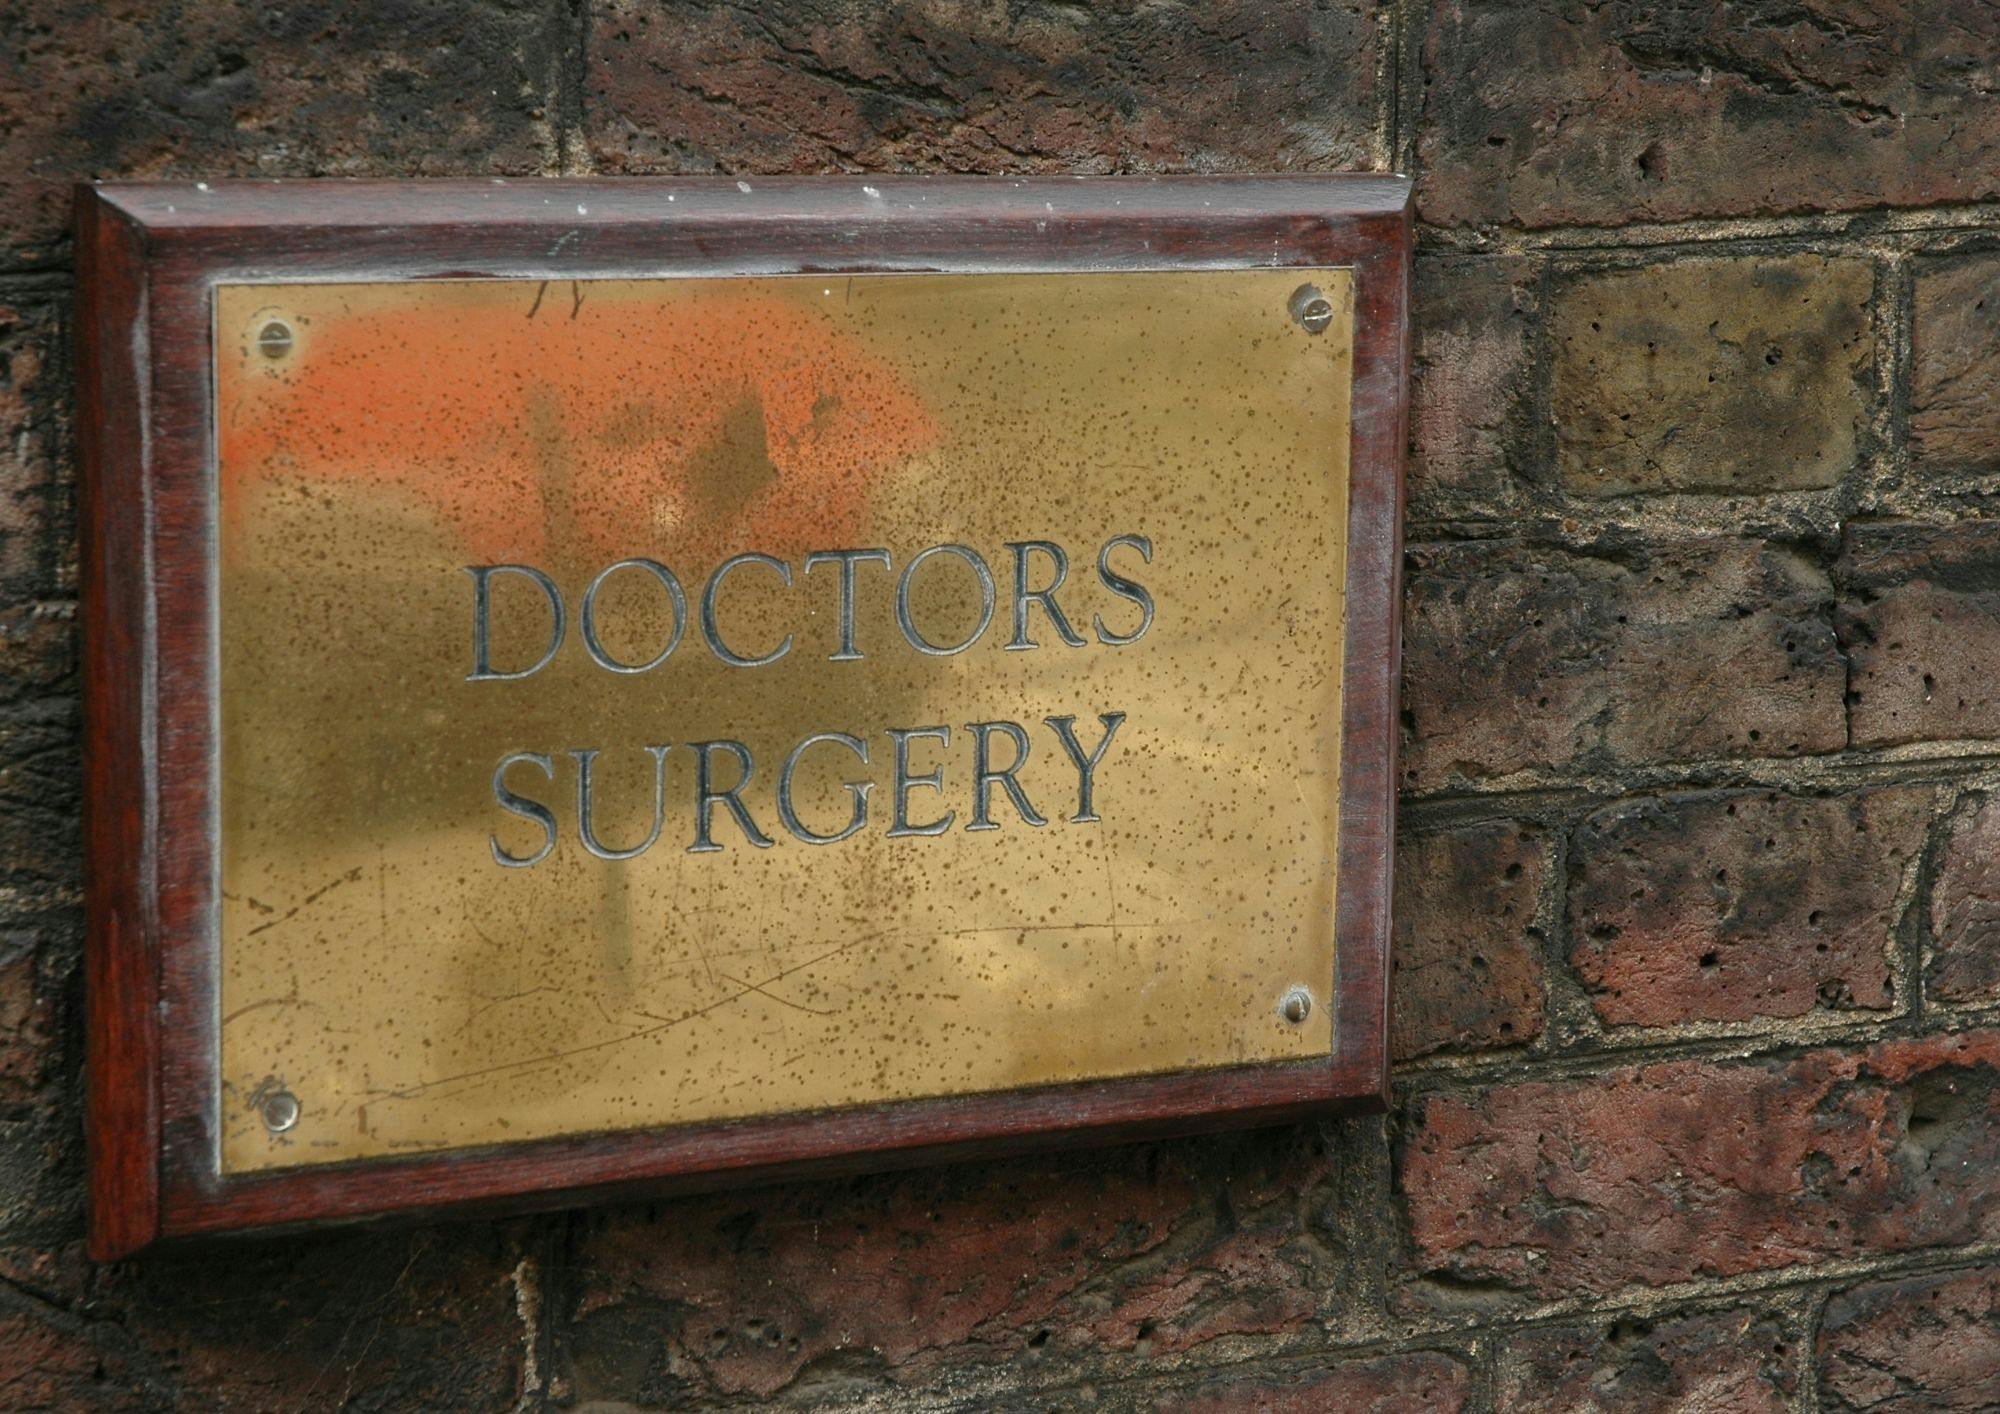 Stock image of a doctors surgery